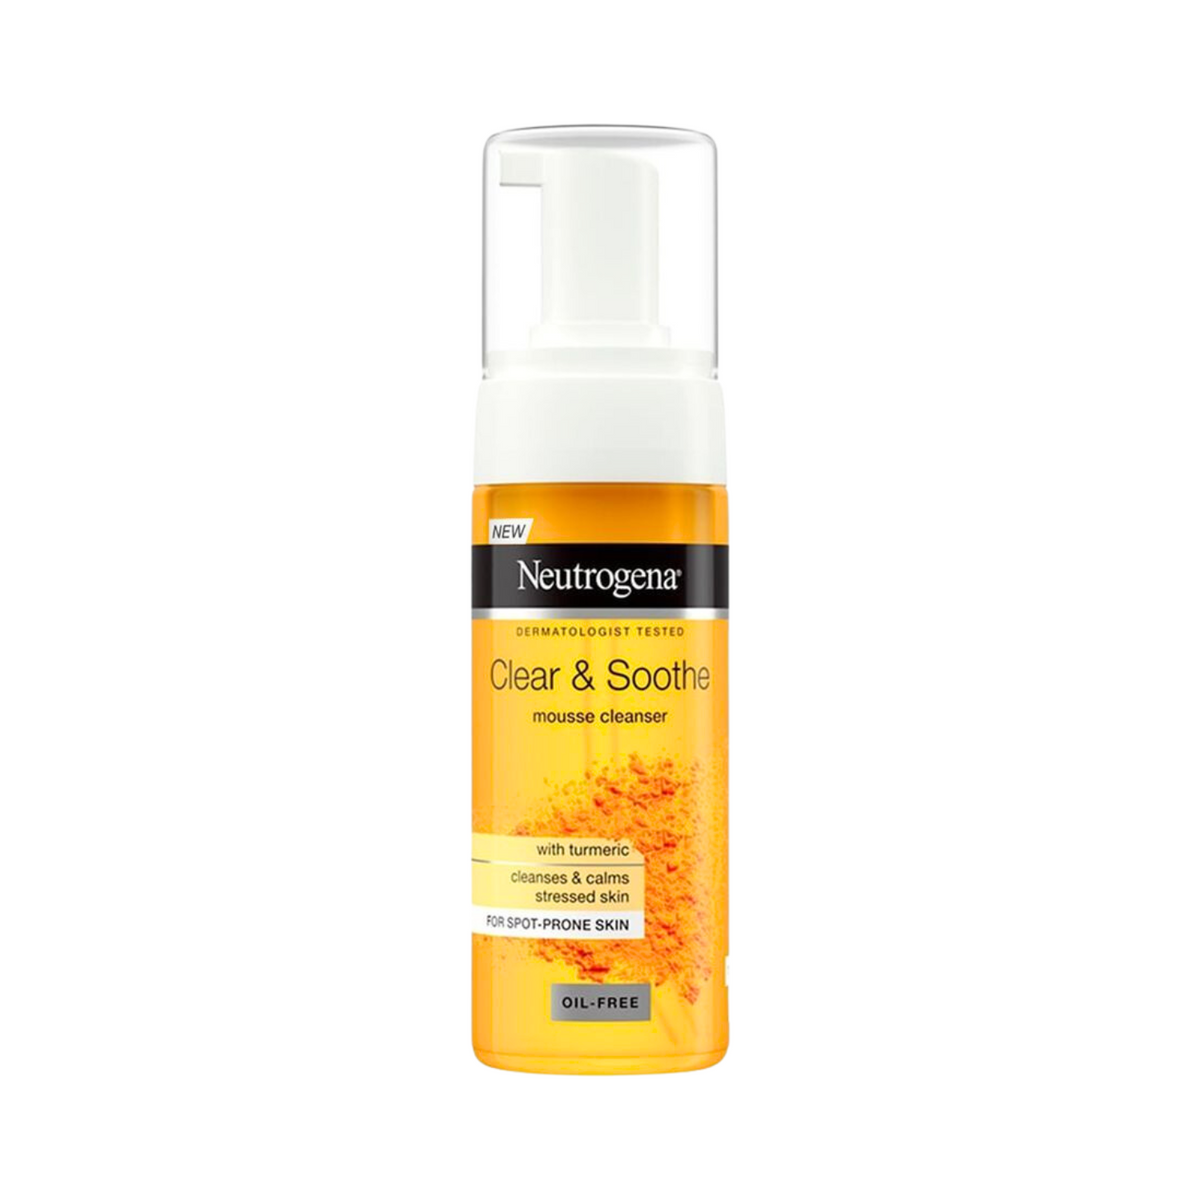 neutrogena-clear-soothe-mousse-cleanser-oil-free-150ml